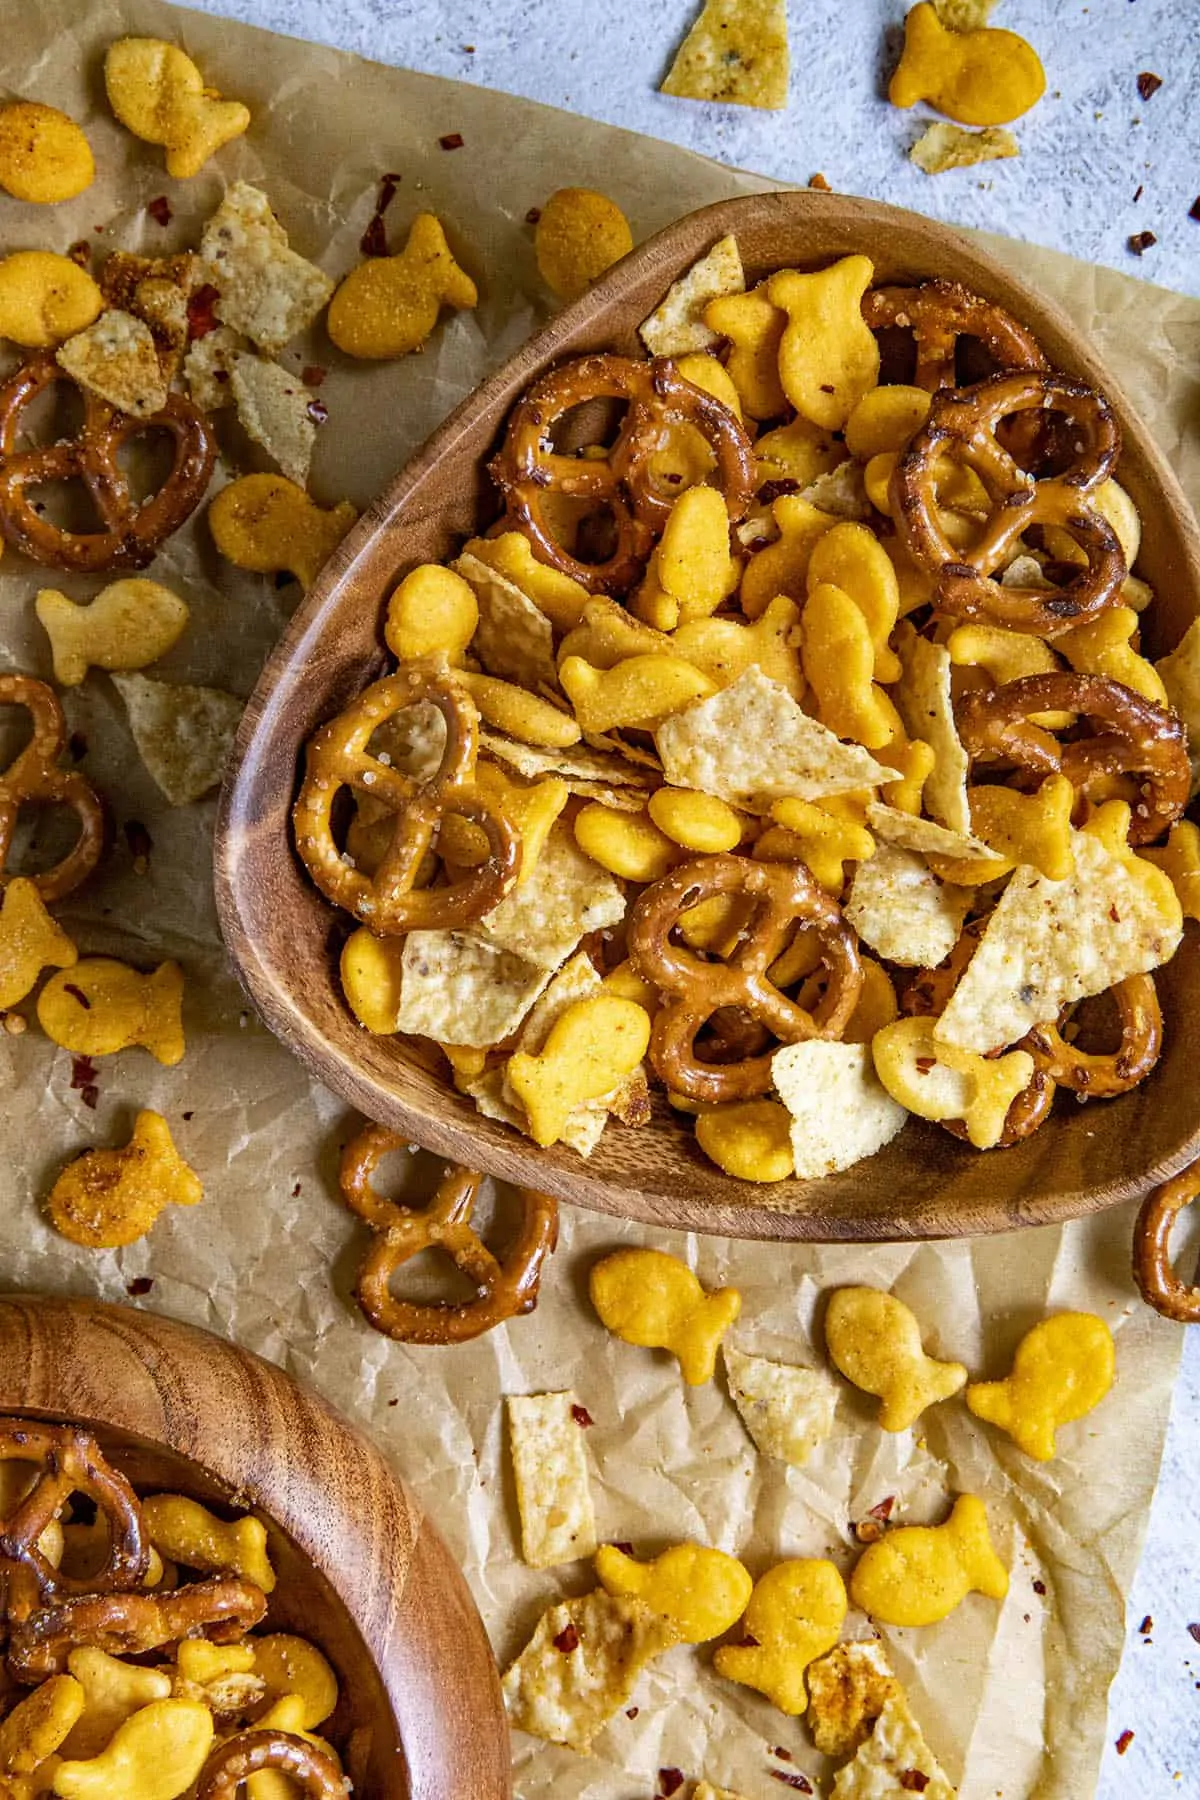 Lots of crunchy Spicy Snack Mix